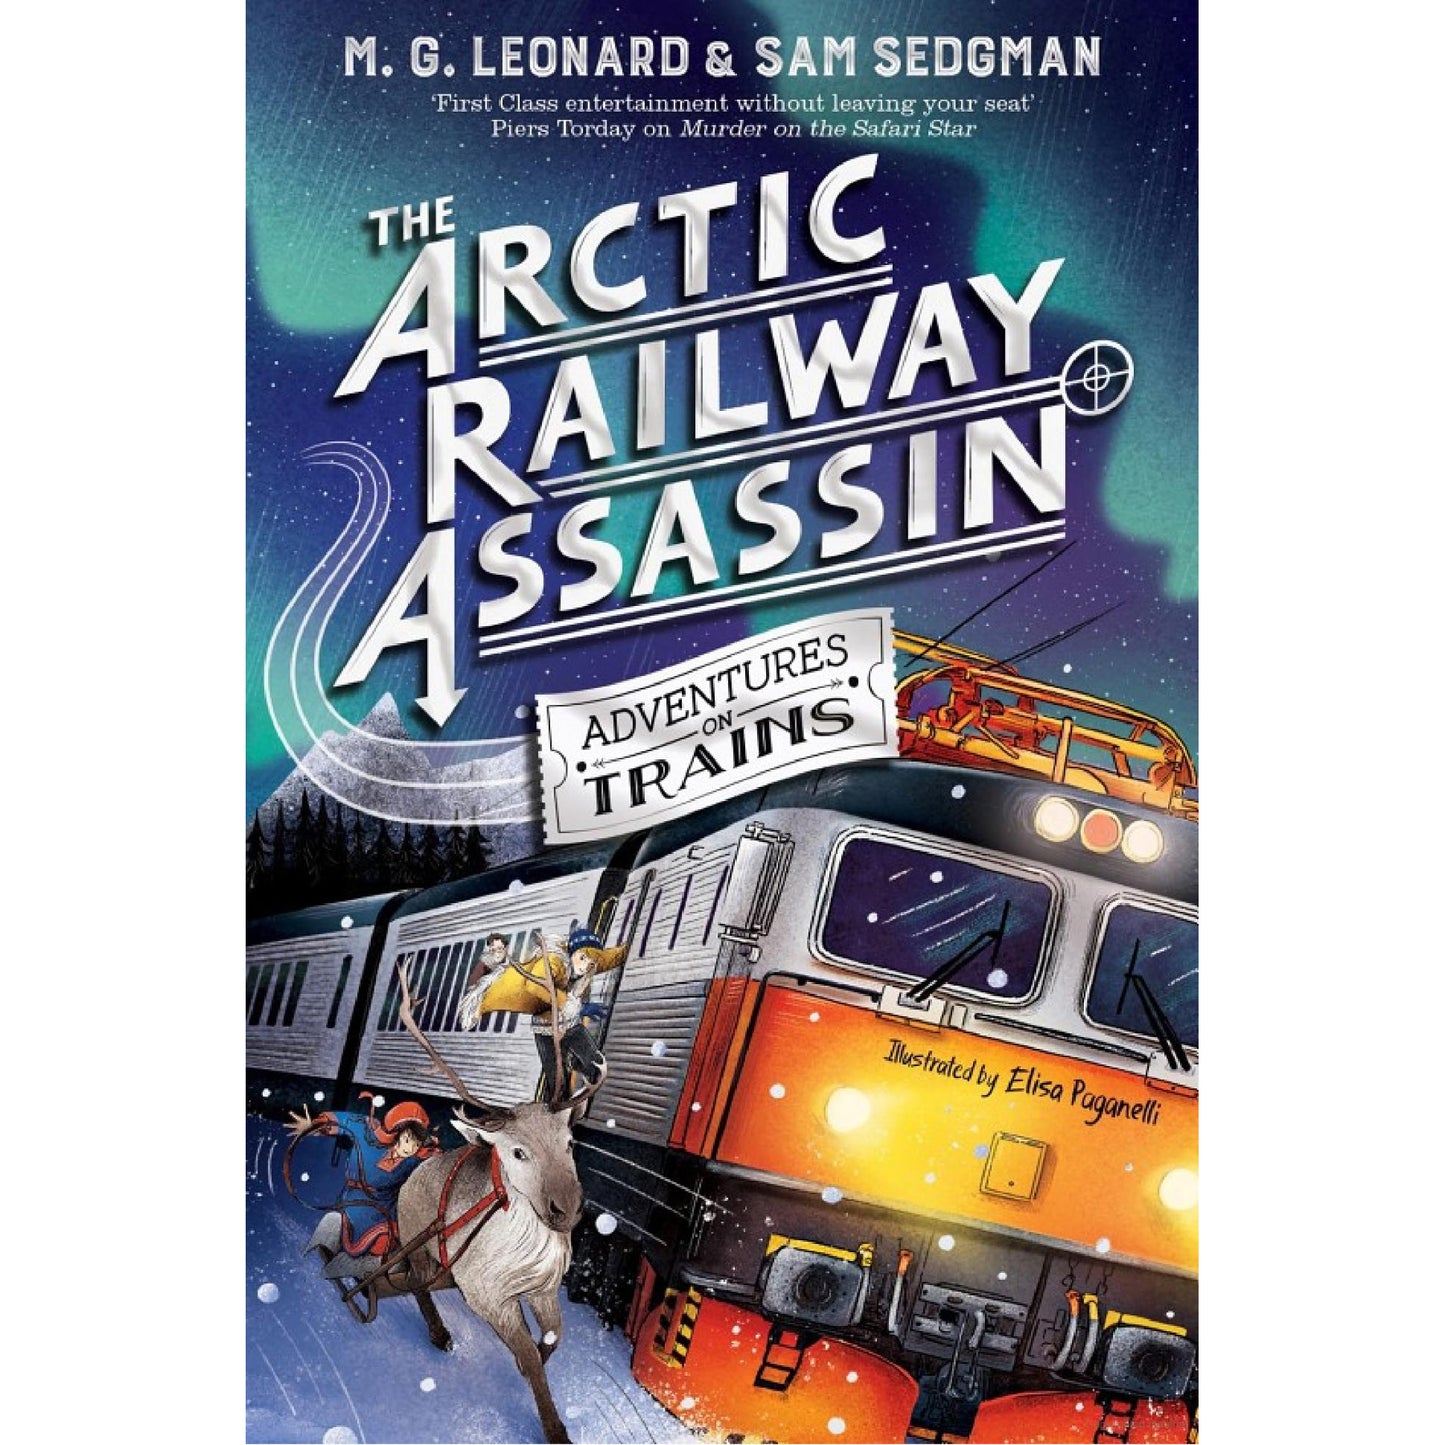 Illustrated book cover featuring a train ploughing through the snow with one child hanging out the door and another racing alongside in a reindeer hauled sleigh with the Northern Lights in the sky above.